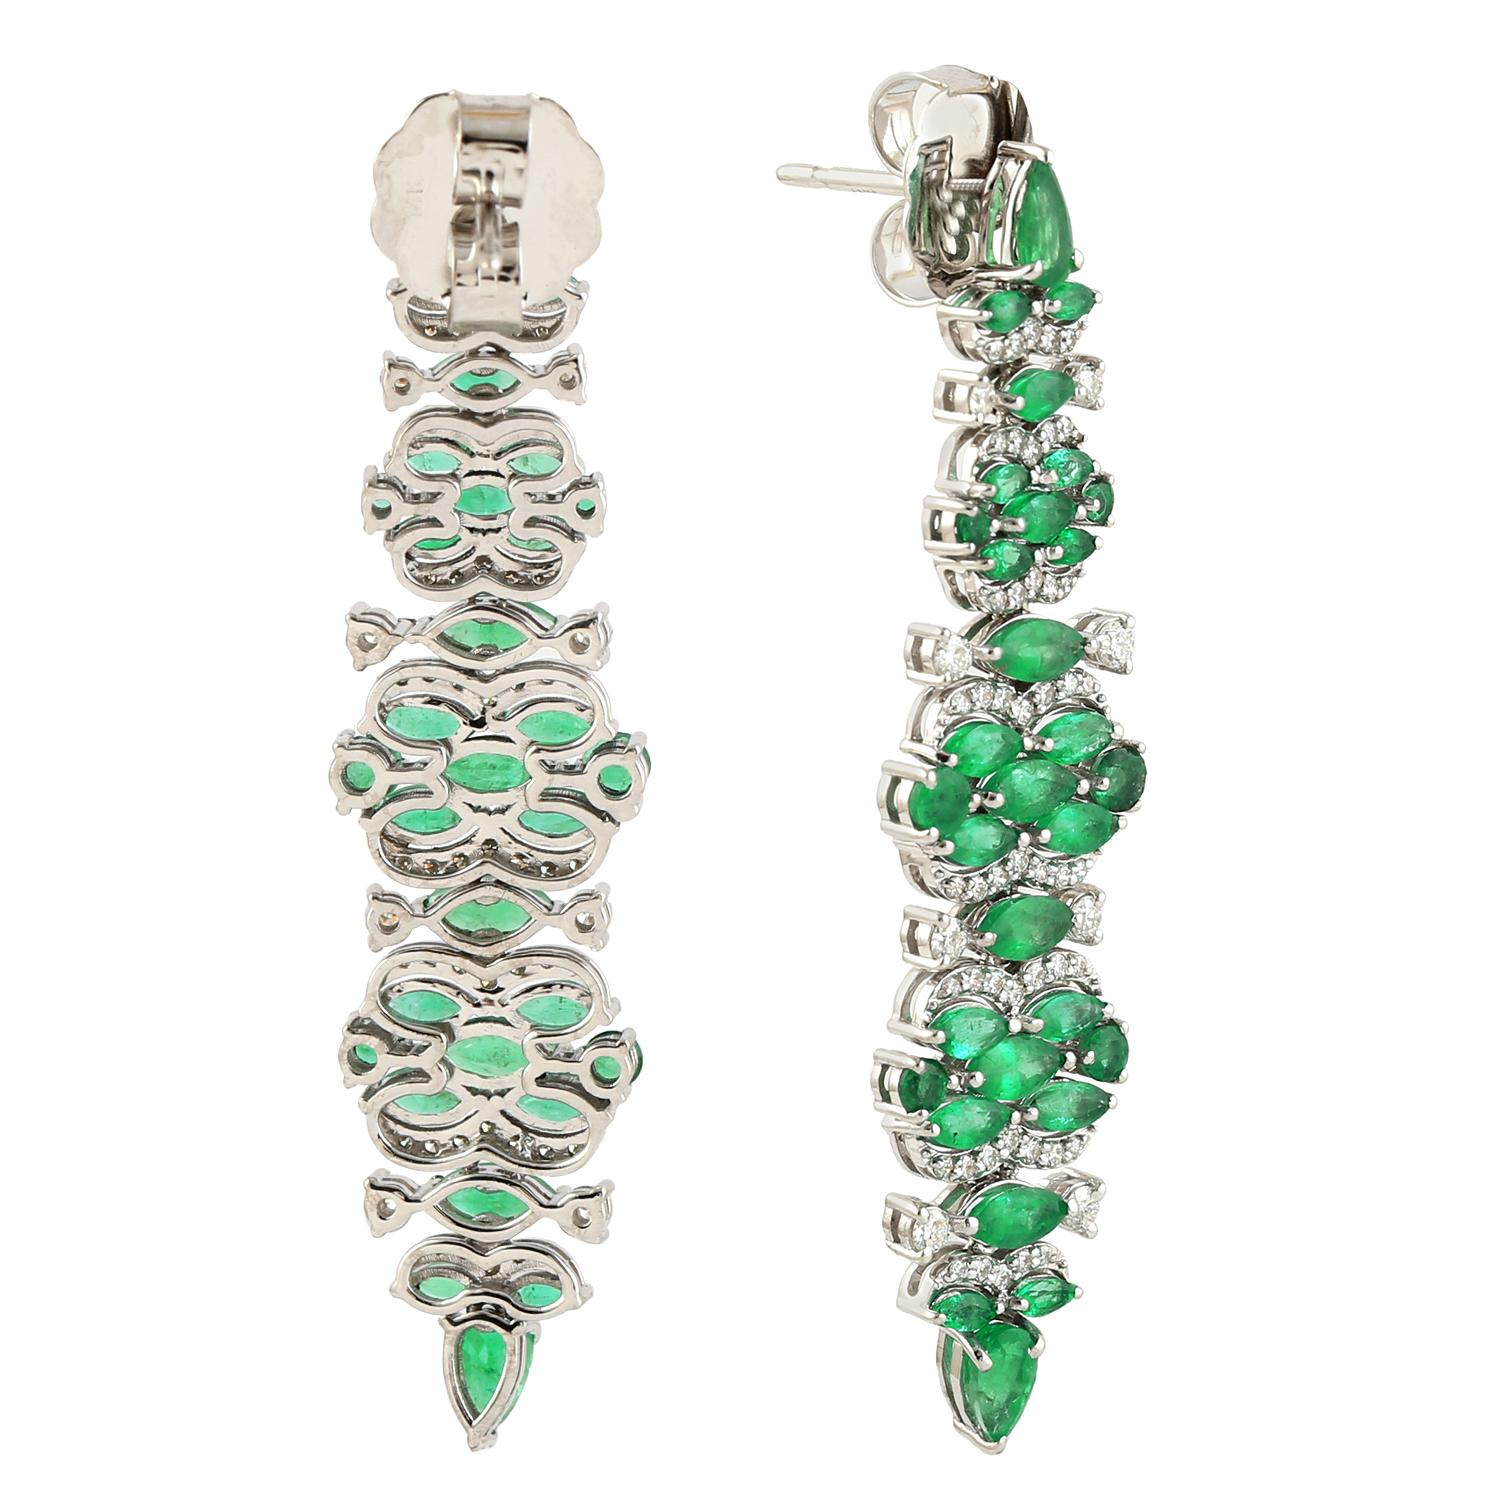 Contemporary Emerald Long Dangle Earrings With Diamonds Made In 14k White Gold For Sale